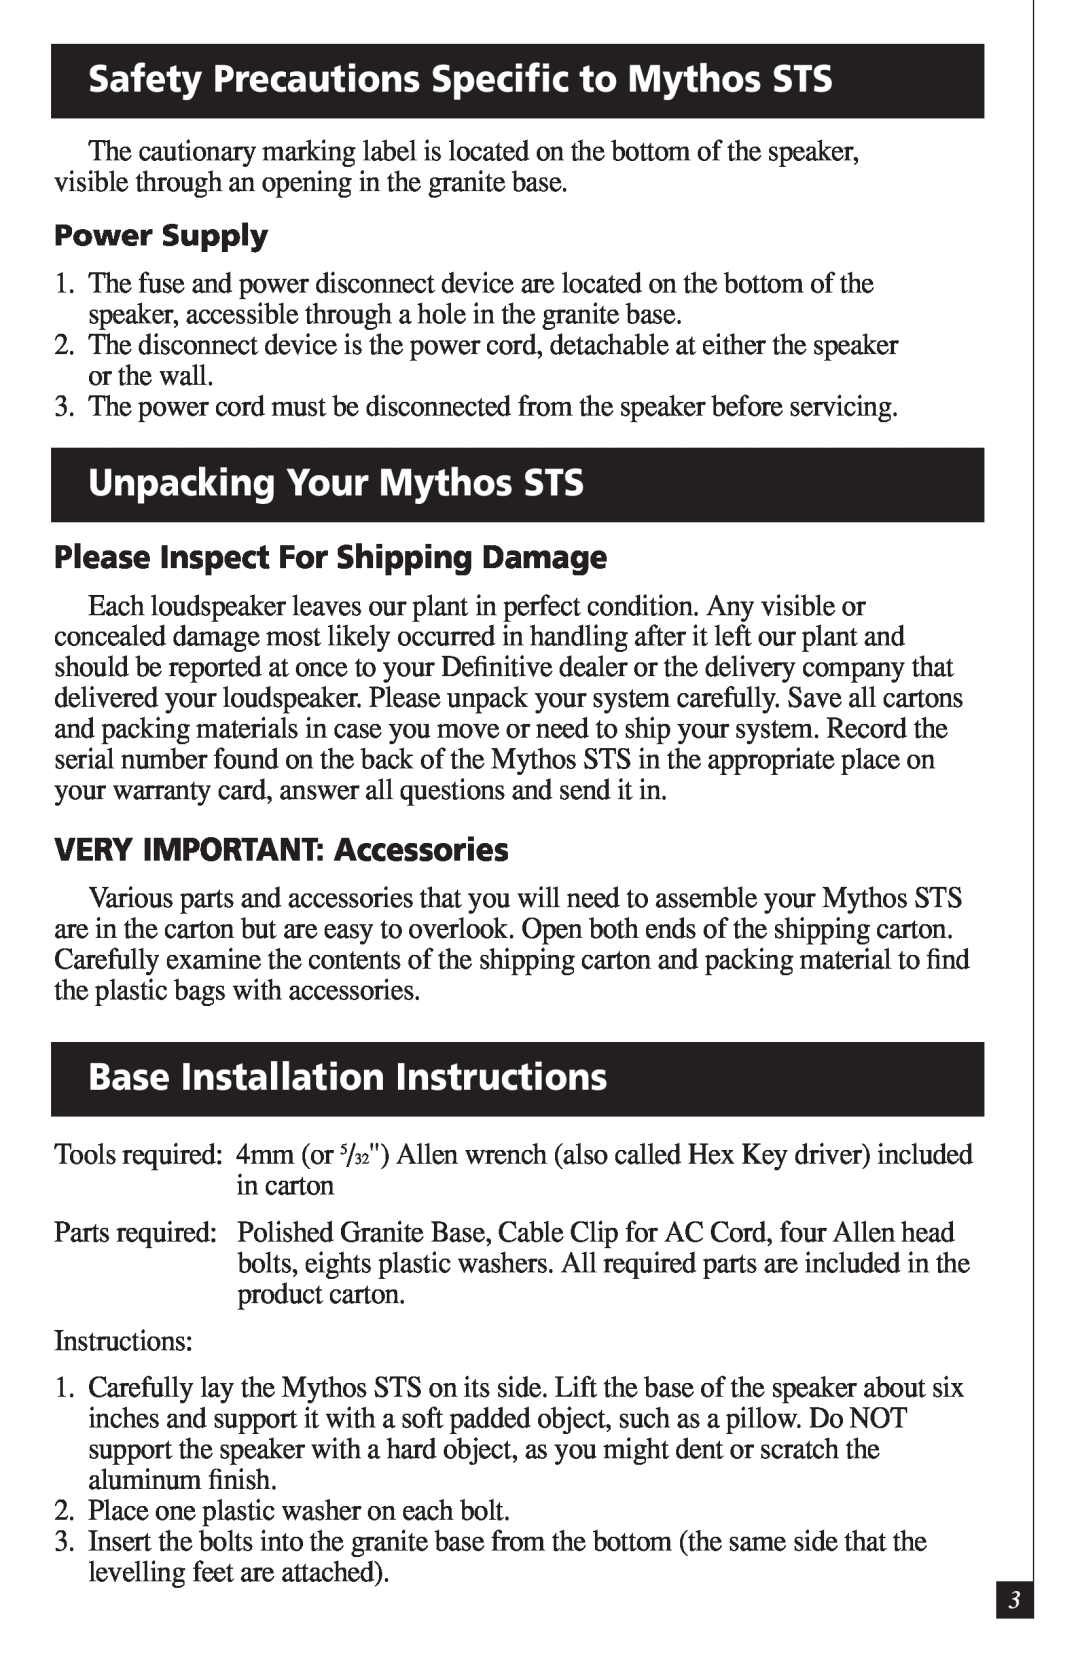 Definitive Technology Safety Precautions Speciﬁc to Mythos STS, Unpacking Your Mythos STS, VERY IMPORTANT Accessories 